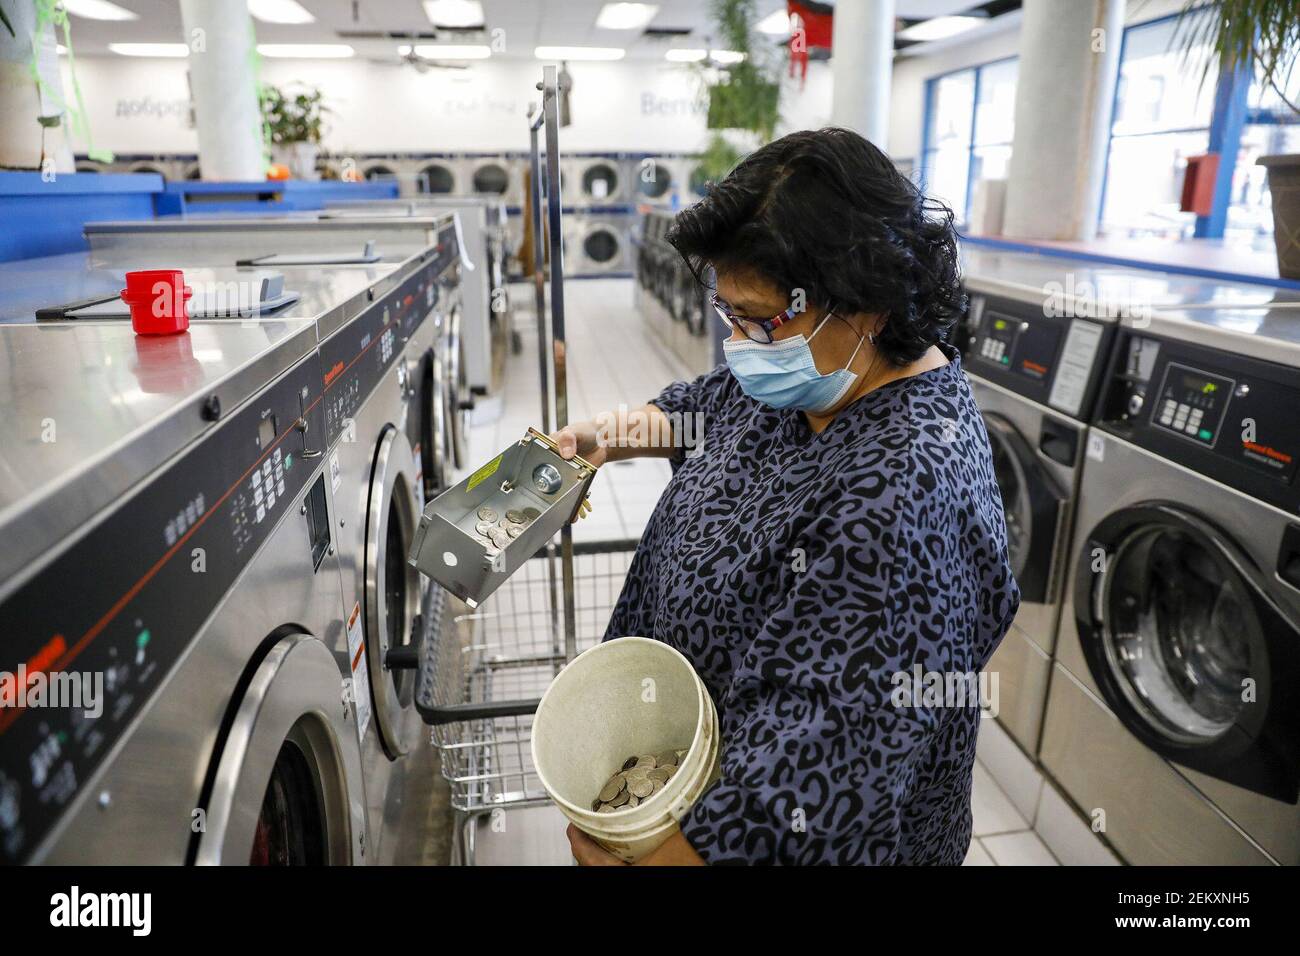 Laura Greco, a store leader, collects quarters from the washing machines at  Friendly Wash Laundromat in Chicago's Logan Square neighborhood on Oct. 29,  2020. (Photo by Jose M. Osorio/Chicago Tribune/TNS/Sipa USA Stock